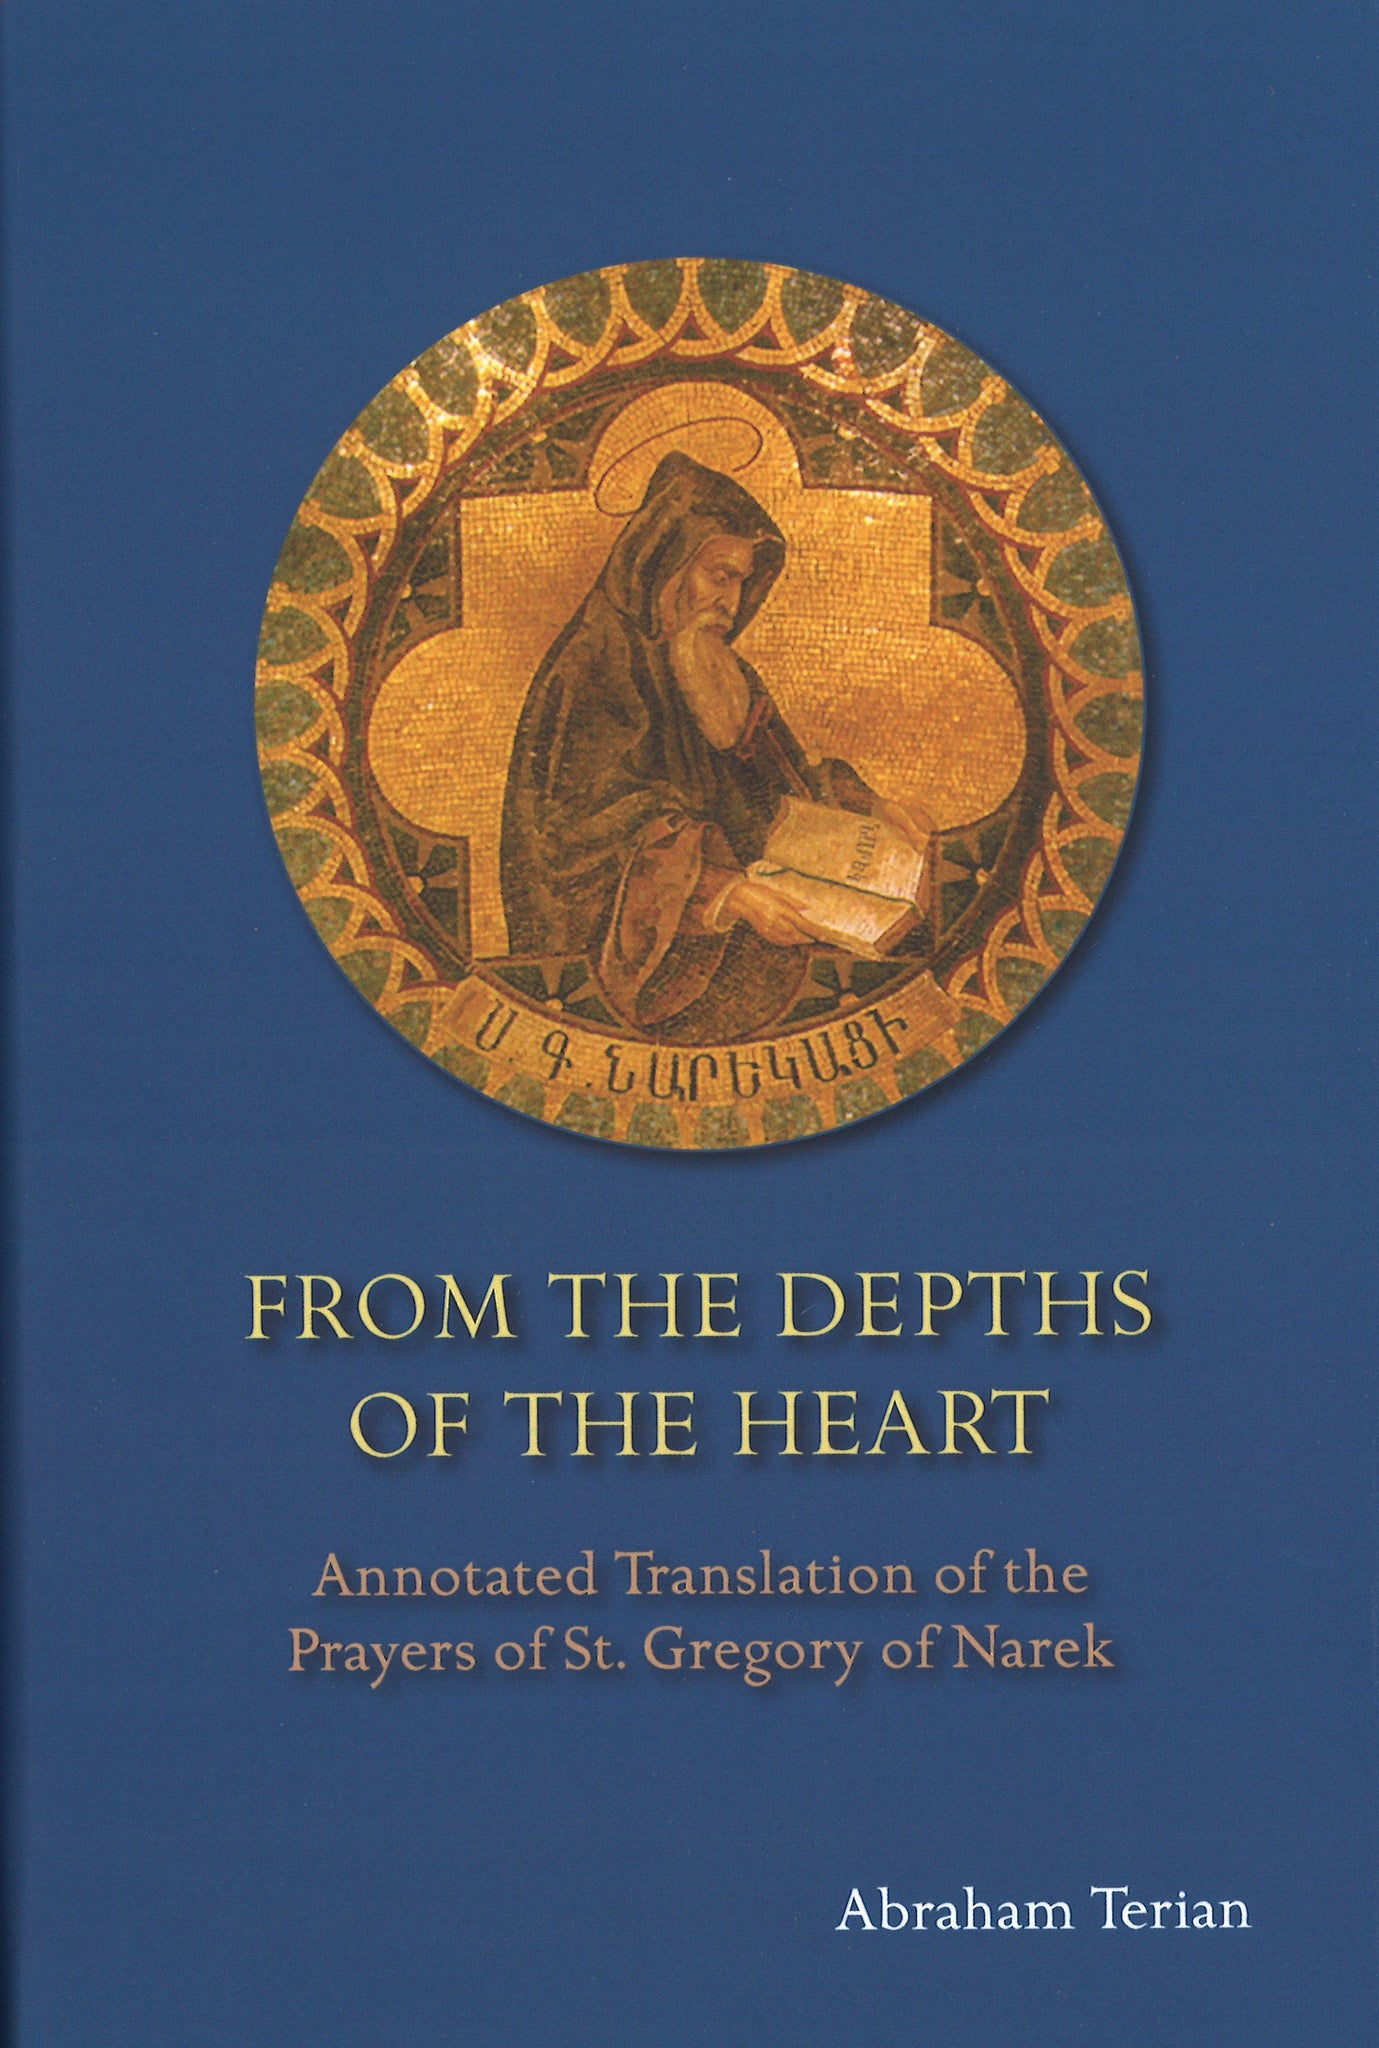 From the Depths of the Heart: Annotated Translation of the Prayers of St. Gregory of Narek